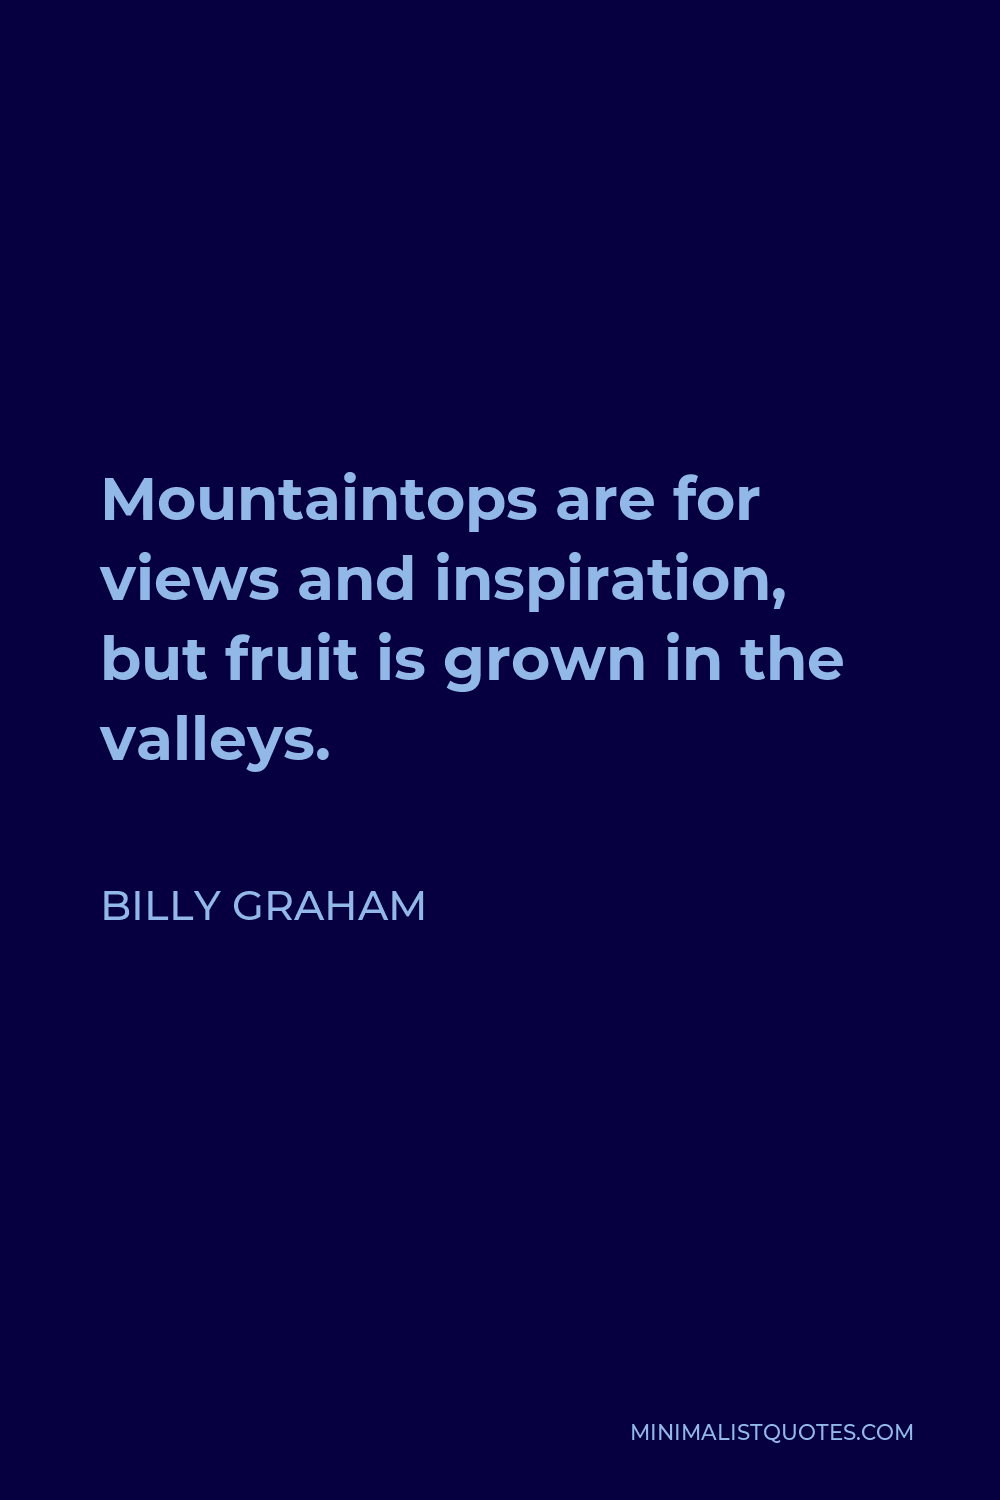 Billy Graham Quote - Mountaintops are for views and inspiration, but fruit is grown in the valleys.